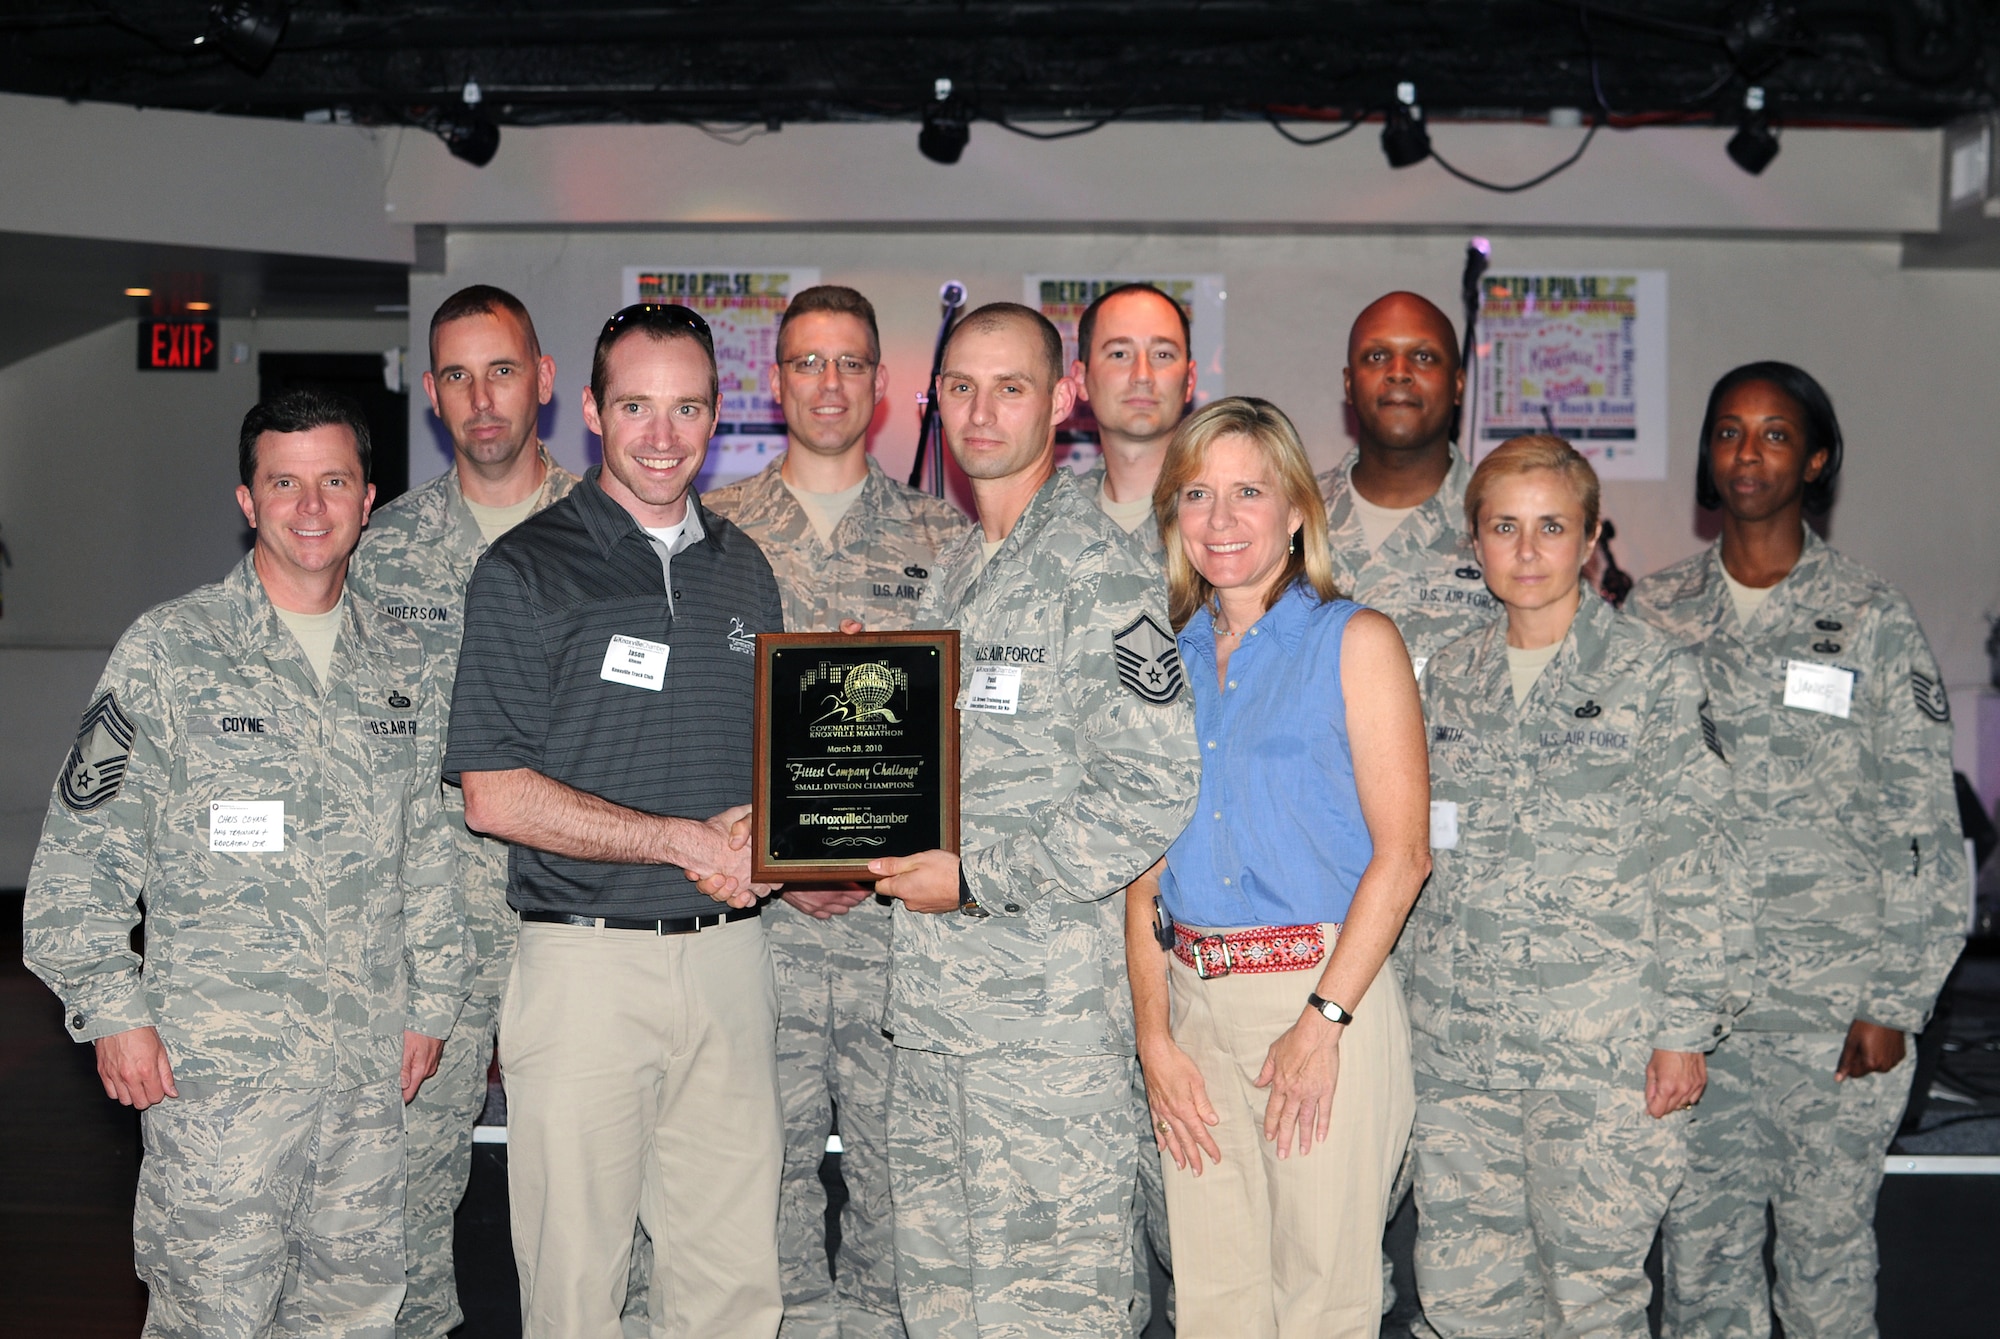 KNOXVILLE, Tenn. -- Servicemembers from The I.G. Brown Air National Guard Training and Education Center, McGhee Tyson ANGB here accept a first place award for the Fittest Company Challenge from the Knoxville Area Chamber Partnership during a ceremony held in Market Square in downtown Knoxville, May 13.  The competition, held March 28 during the Covenant Health Knoxville Marathon, was a friendly contest among area businesses designed to promote a healthy lifestyle and in turn create healthy employees.  (U.S. Air Force photo by Master Sgt. Kurt Skoglund)